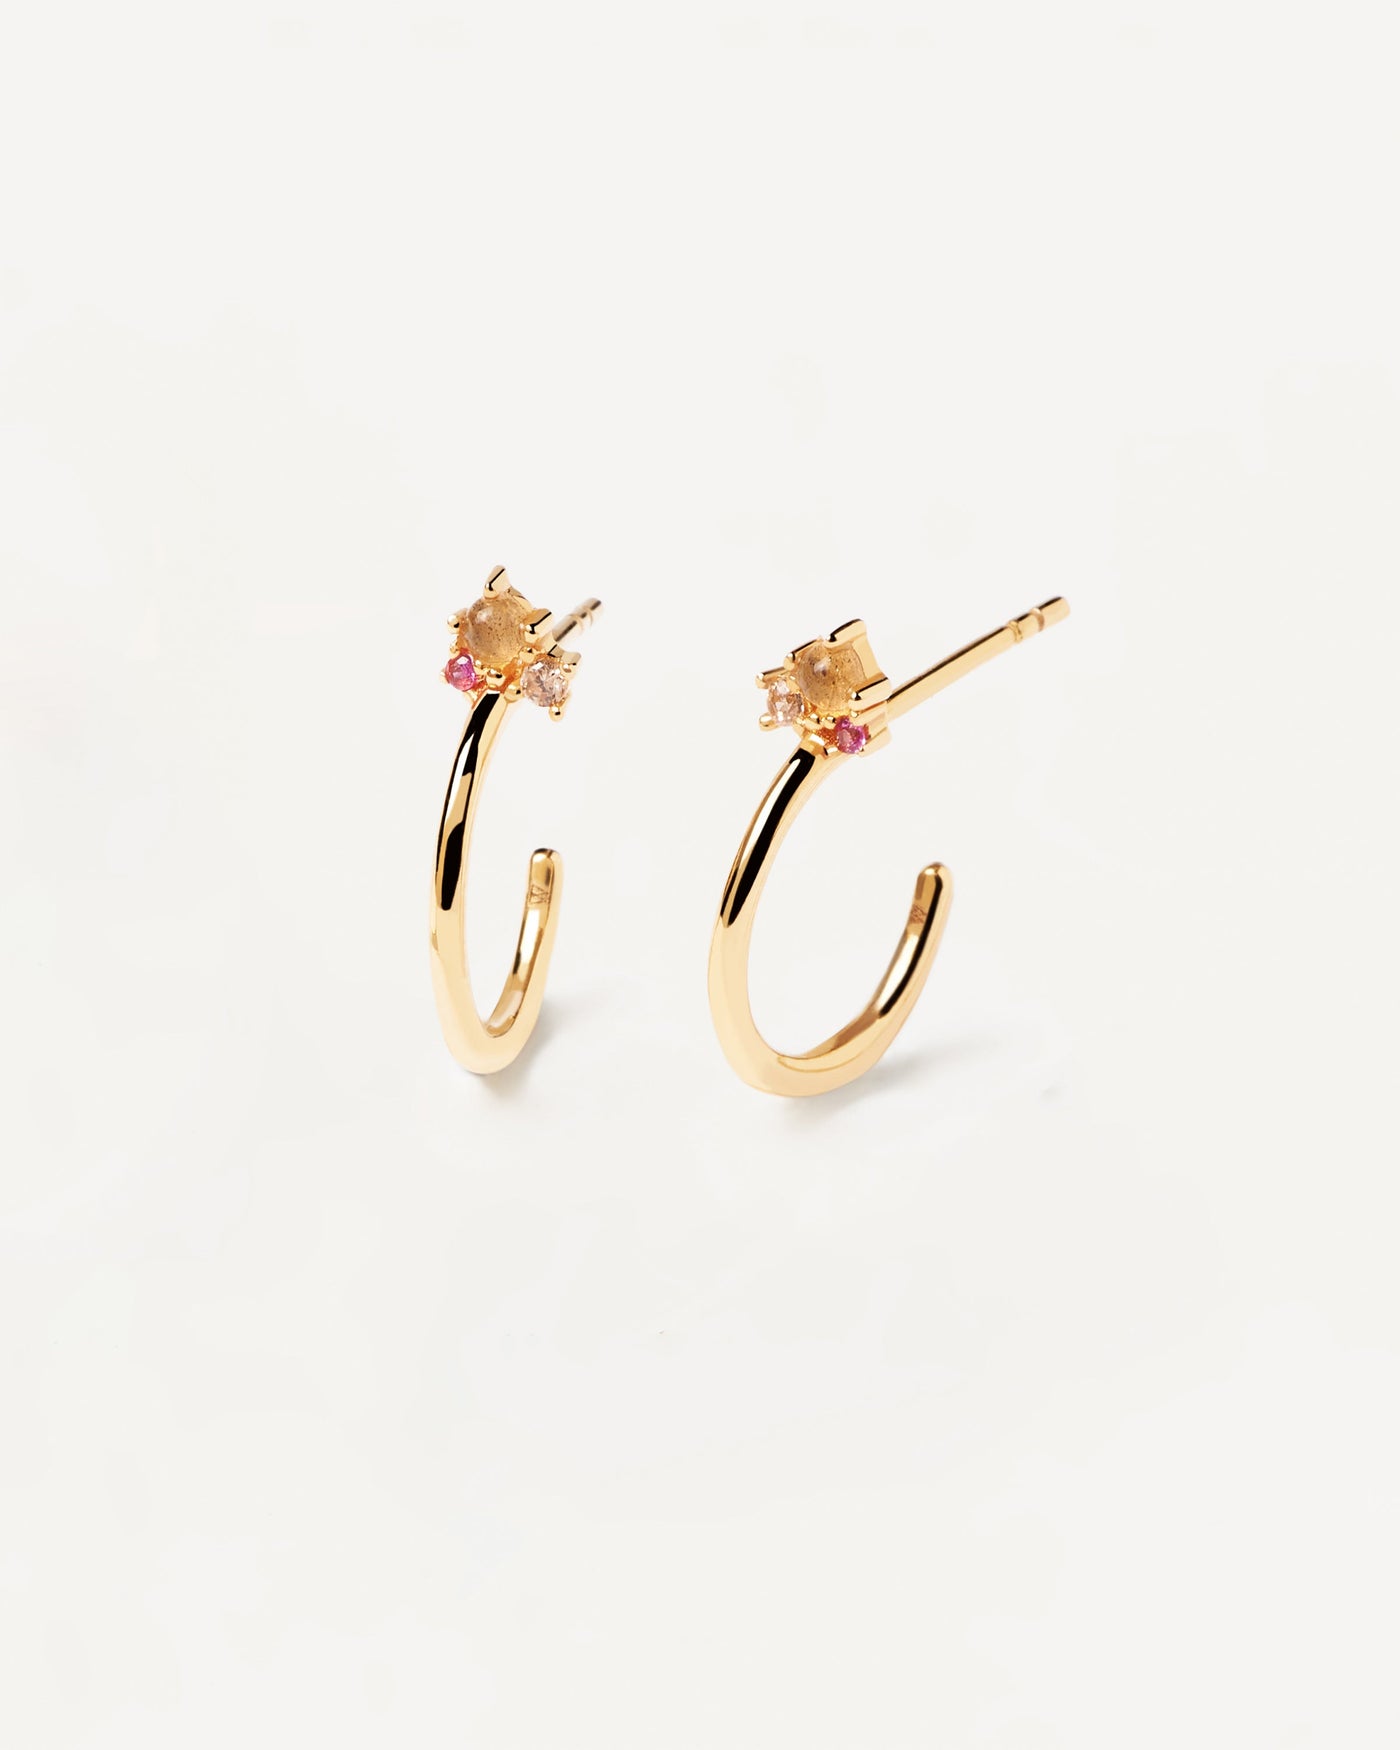 2023 Selection | Libellule Earrings. Pair of 18k goldplated silver c-hoops set with champage, rose red zirconias and labradorite. Get the latest arrival from PDPAOLA. Place your order safely and get this Best Seller. Free Shipping.